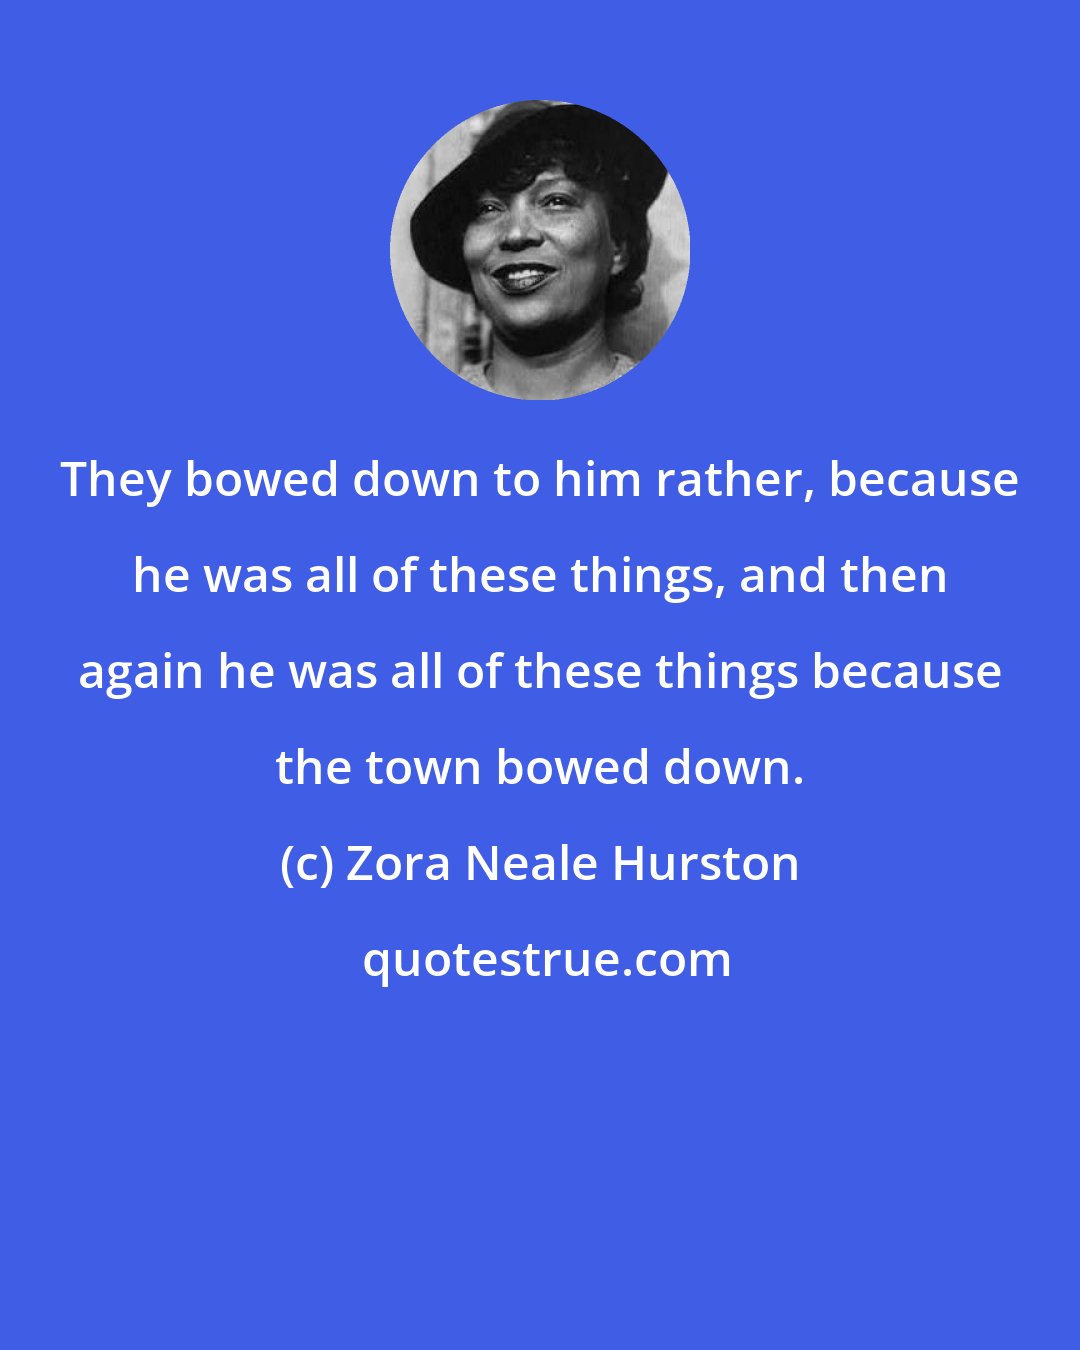 Zora Neale Hurston: They bowed down to him rather, because he was all of these things, and then again he was all of these things because the town bowed down.